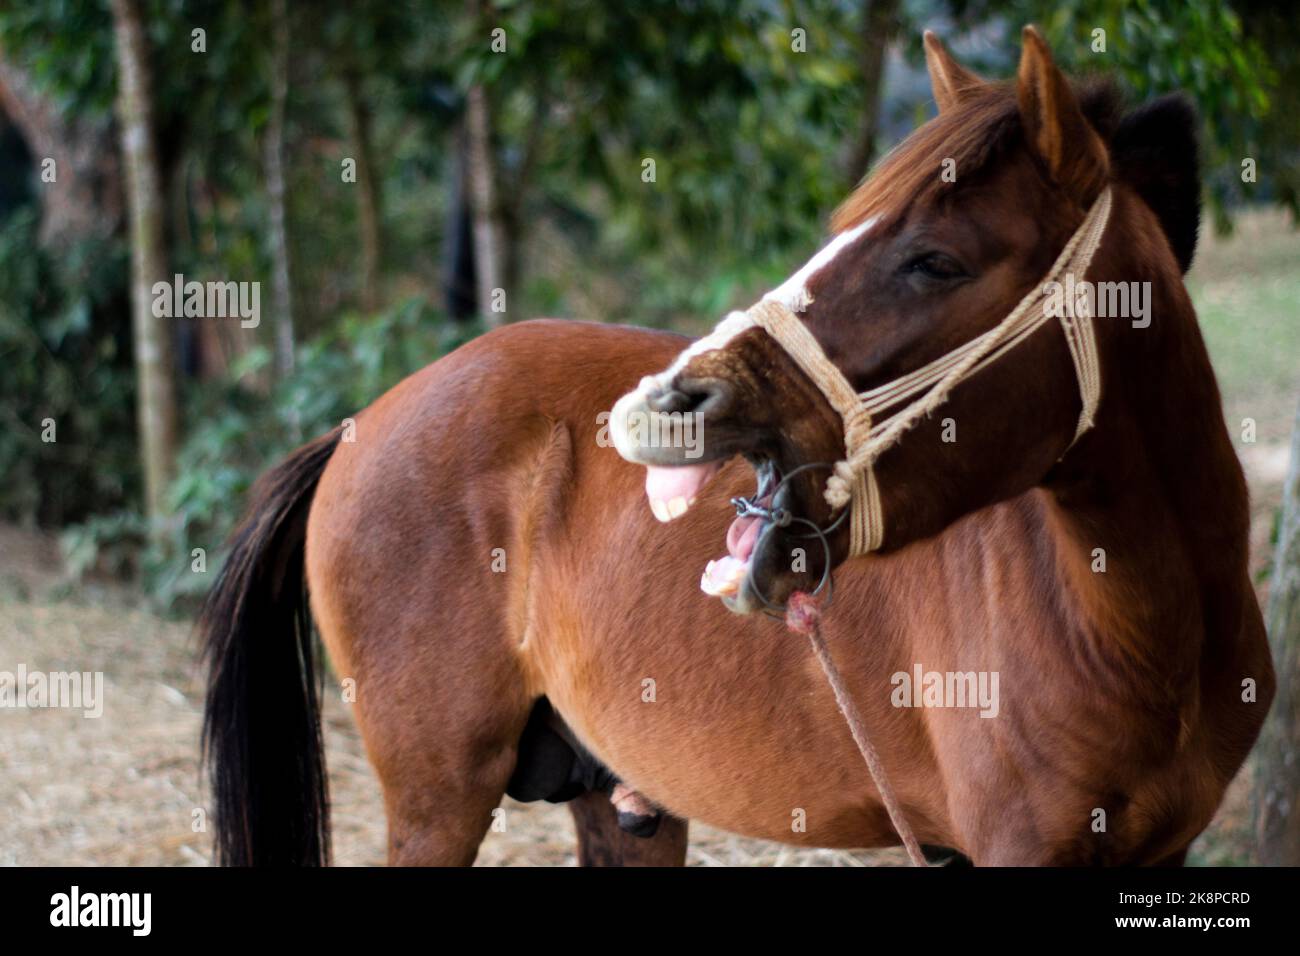 A funny brown horse laughing with the open muzzle on an isolated nature background Stock Photo